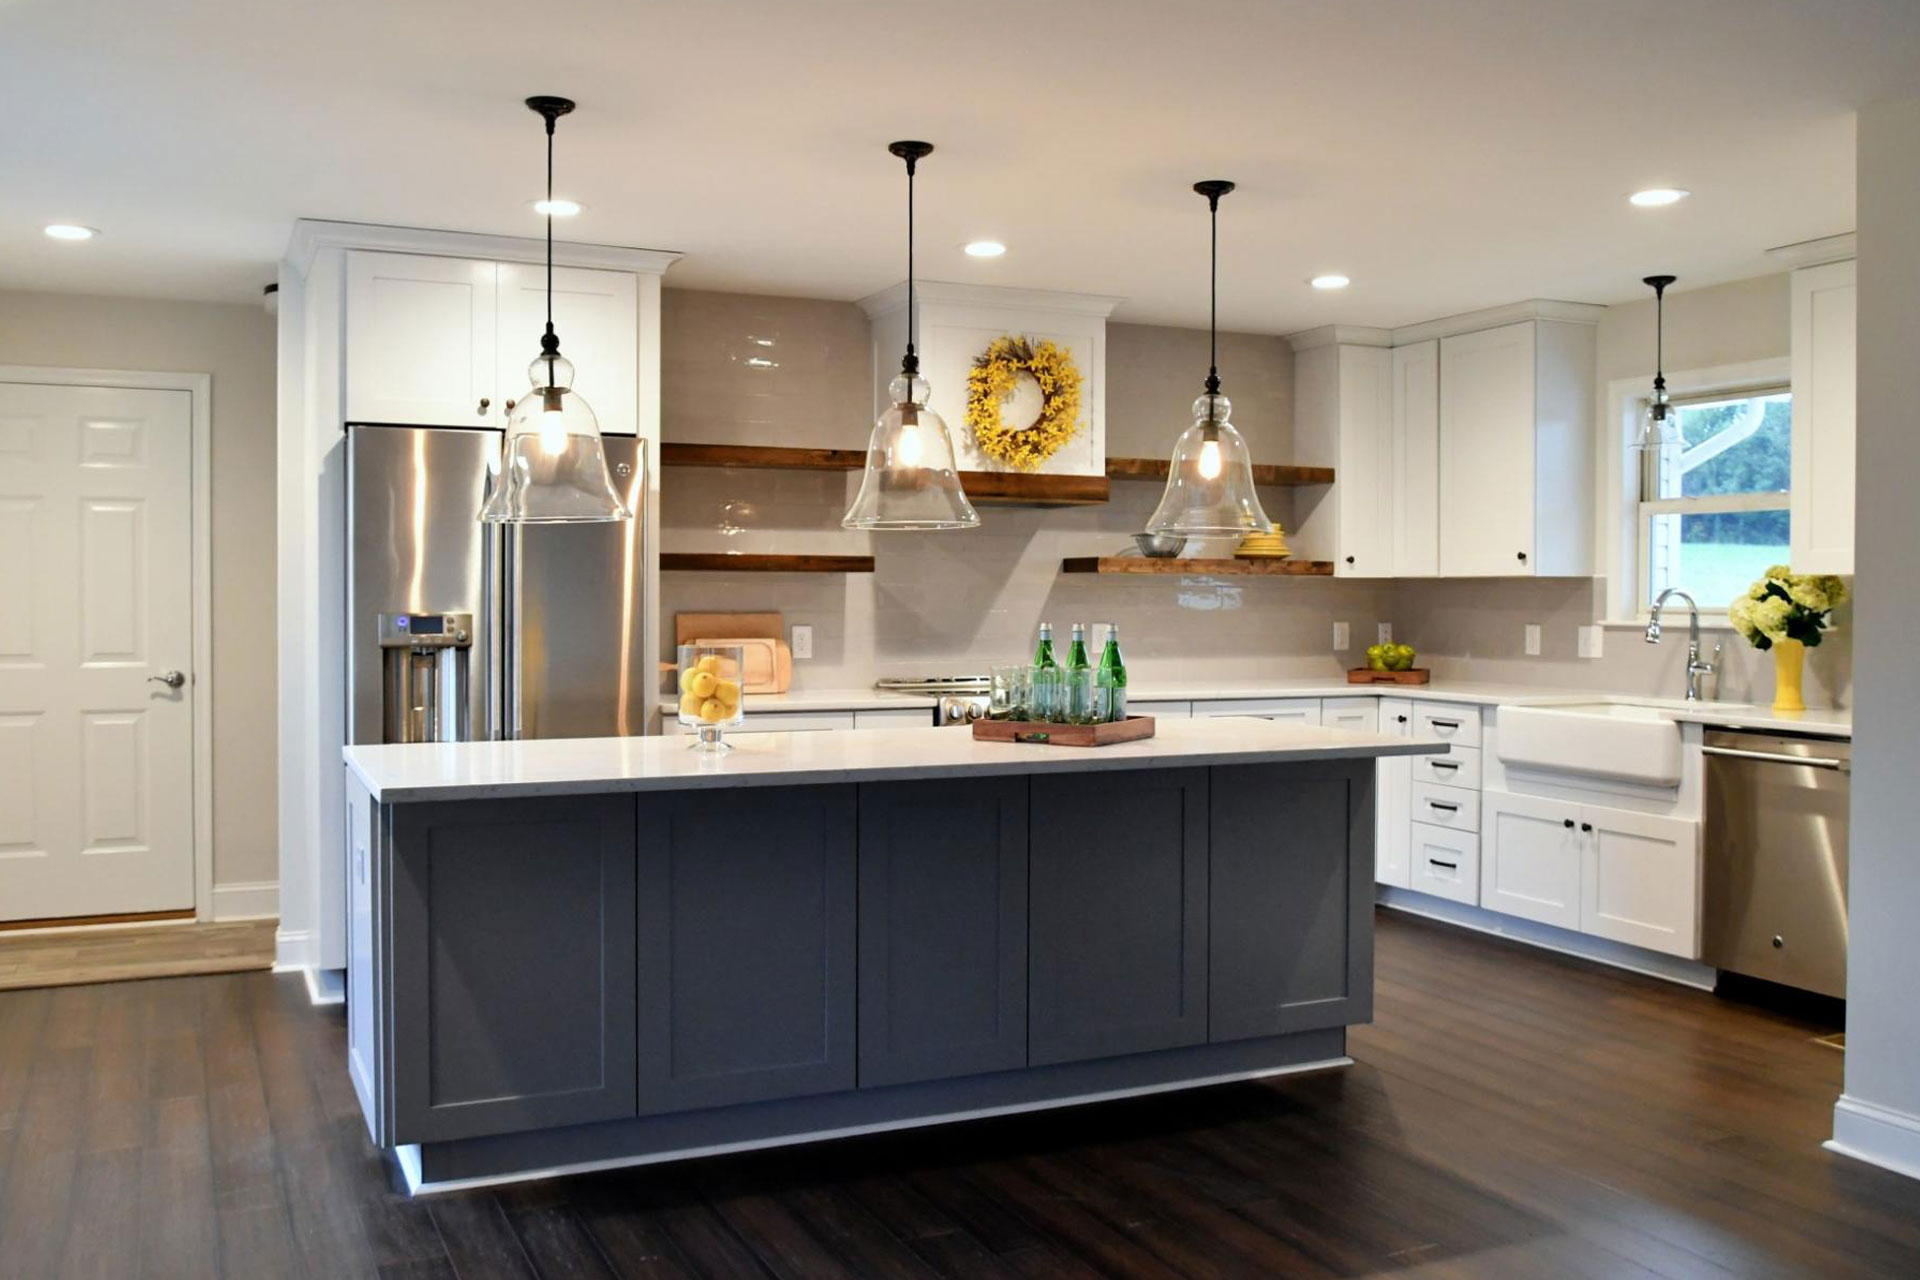 How to Decorate Your Kitchen in 4 Easy Ways - Urban Concepts